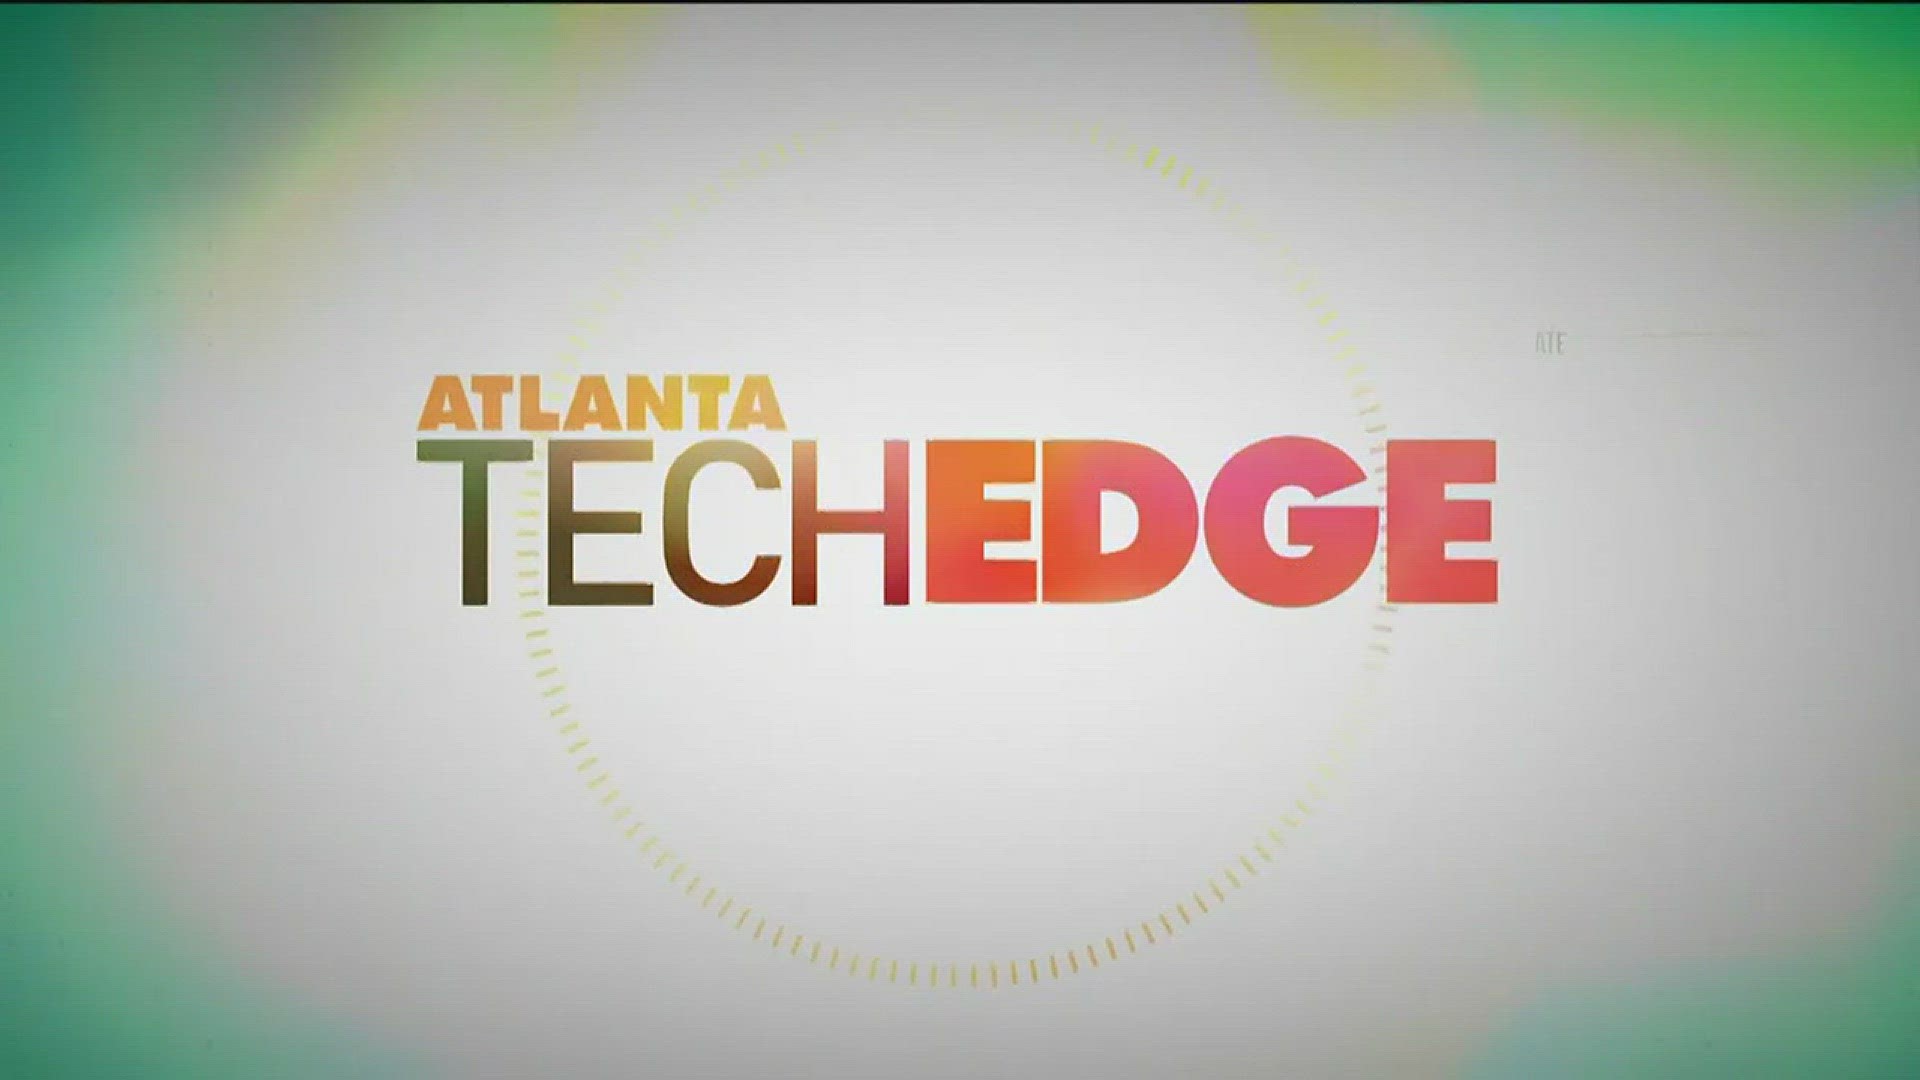 Join the Tech Edge party! We talk tech, welcome great guests, get social, and yes, dance... Sunday mornings at 1:30 and 11:30 on 11Alive with Cara Kneer.